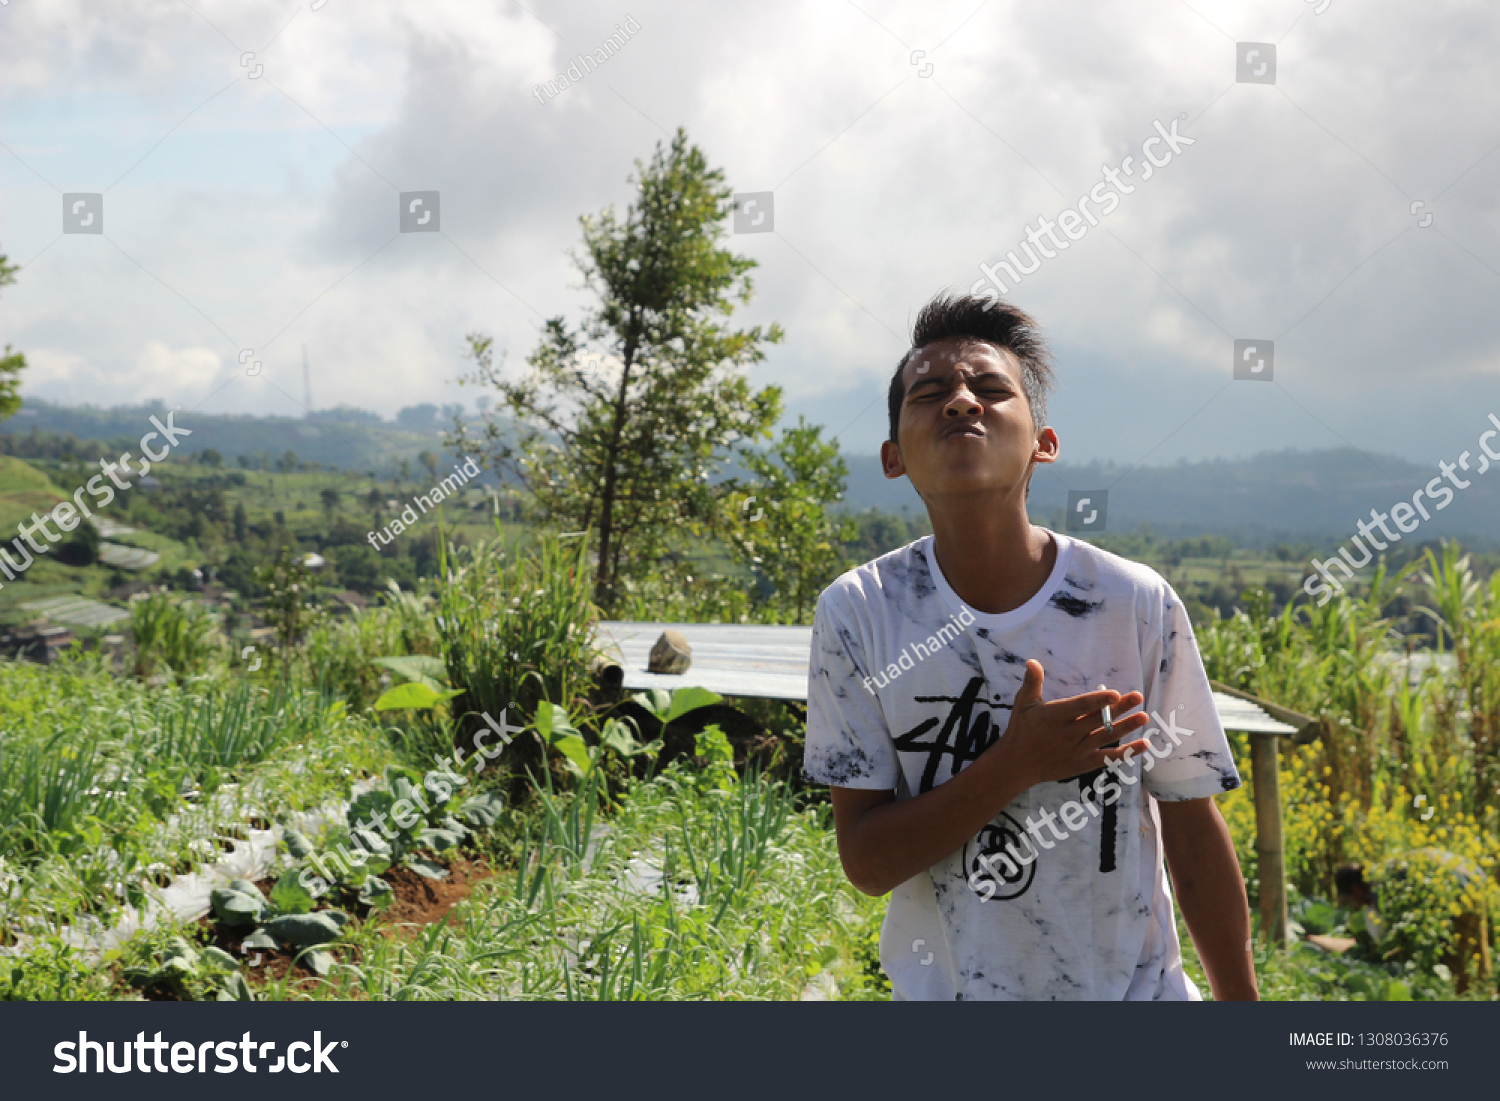 teenagers play on the hill to see the sights and see clouds, in magelang indonesia 3 february 2019 #1308036376